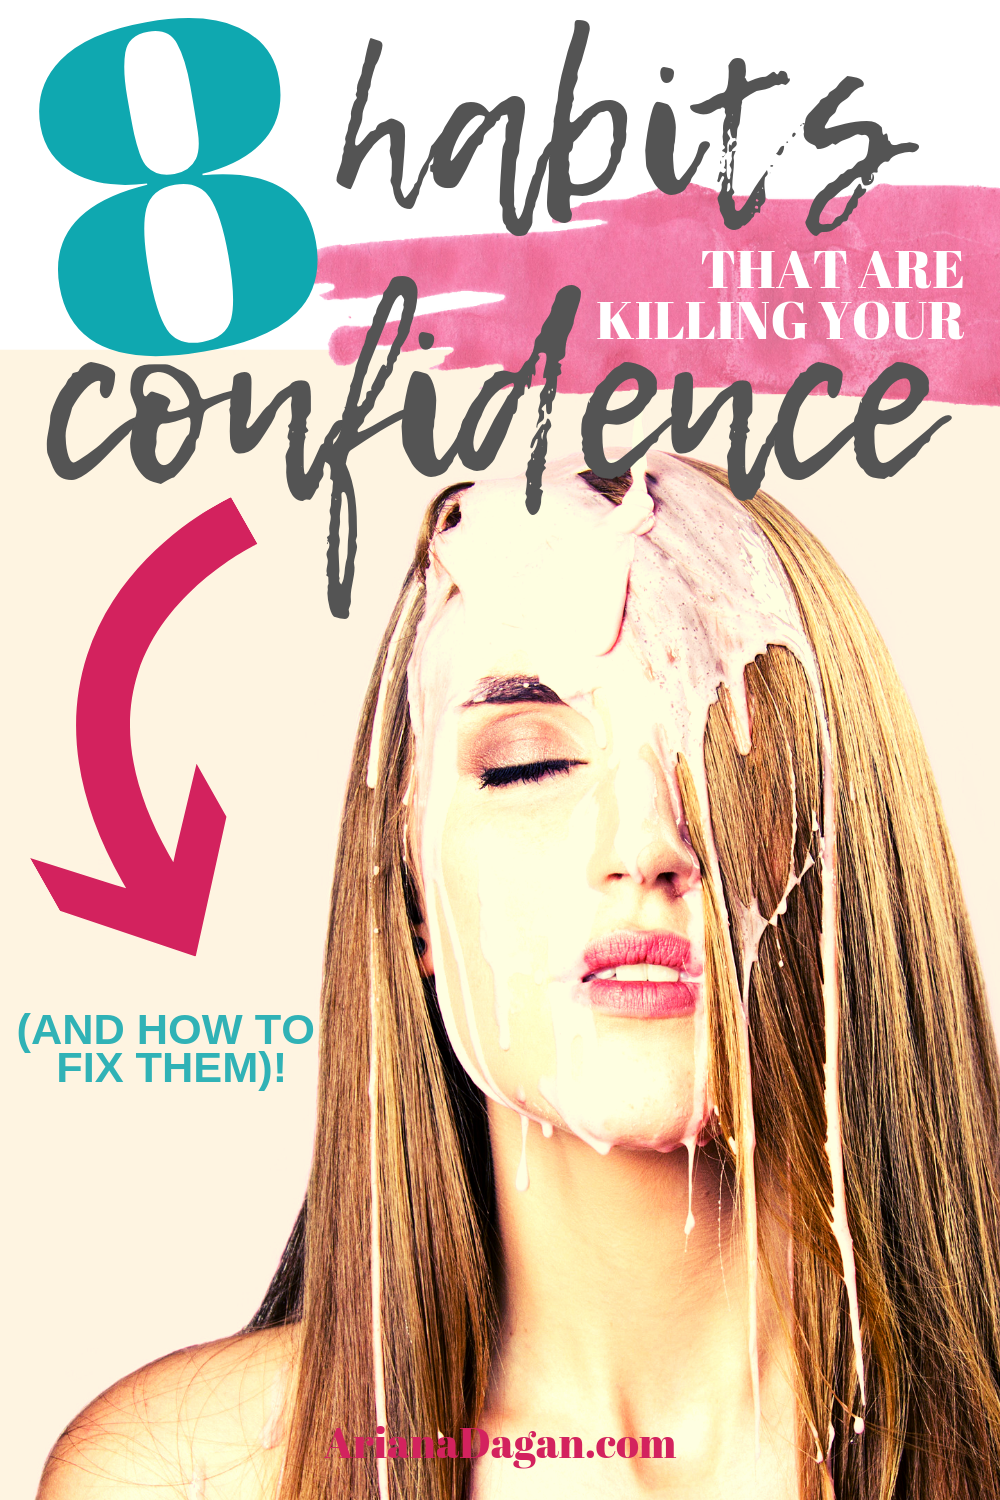 8 Habits That Are Killing Your Confidence by Ariana Dagan